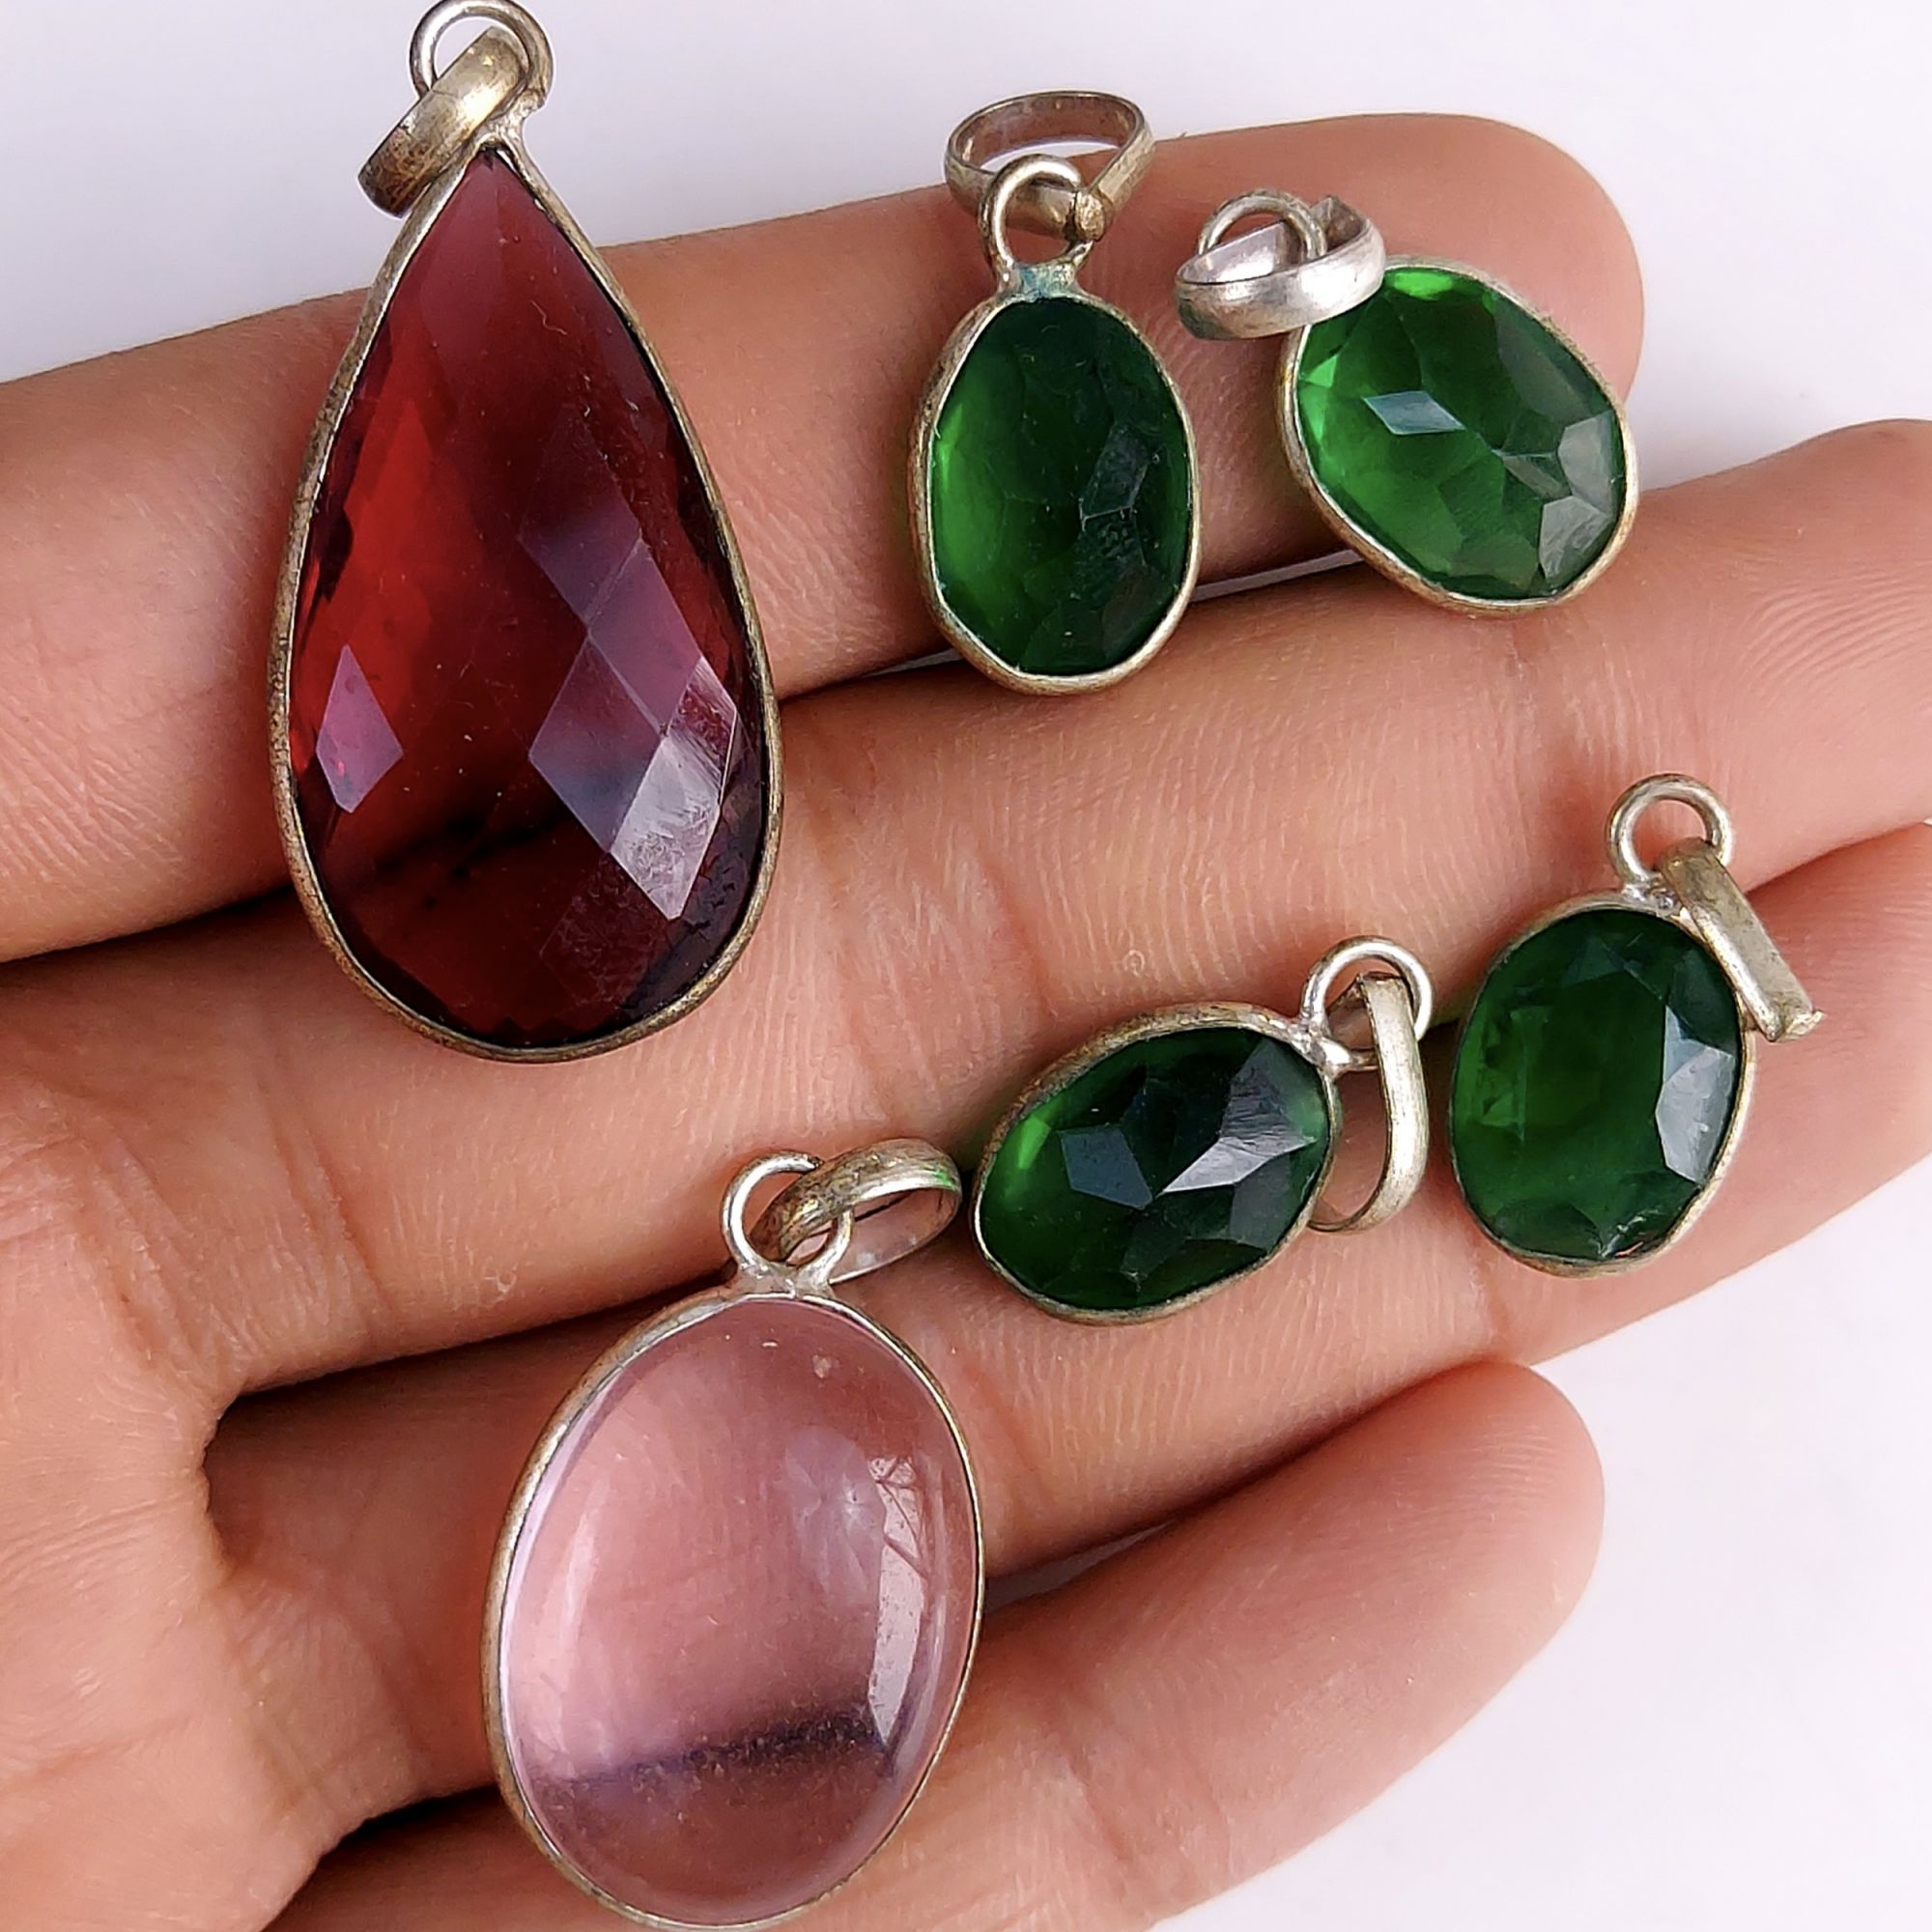 6Pcs 87Cts Glass Gemstone Pink Green Purple Faceted Pendant Silver Plated Lot 30x15 12x9mm#596